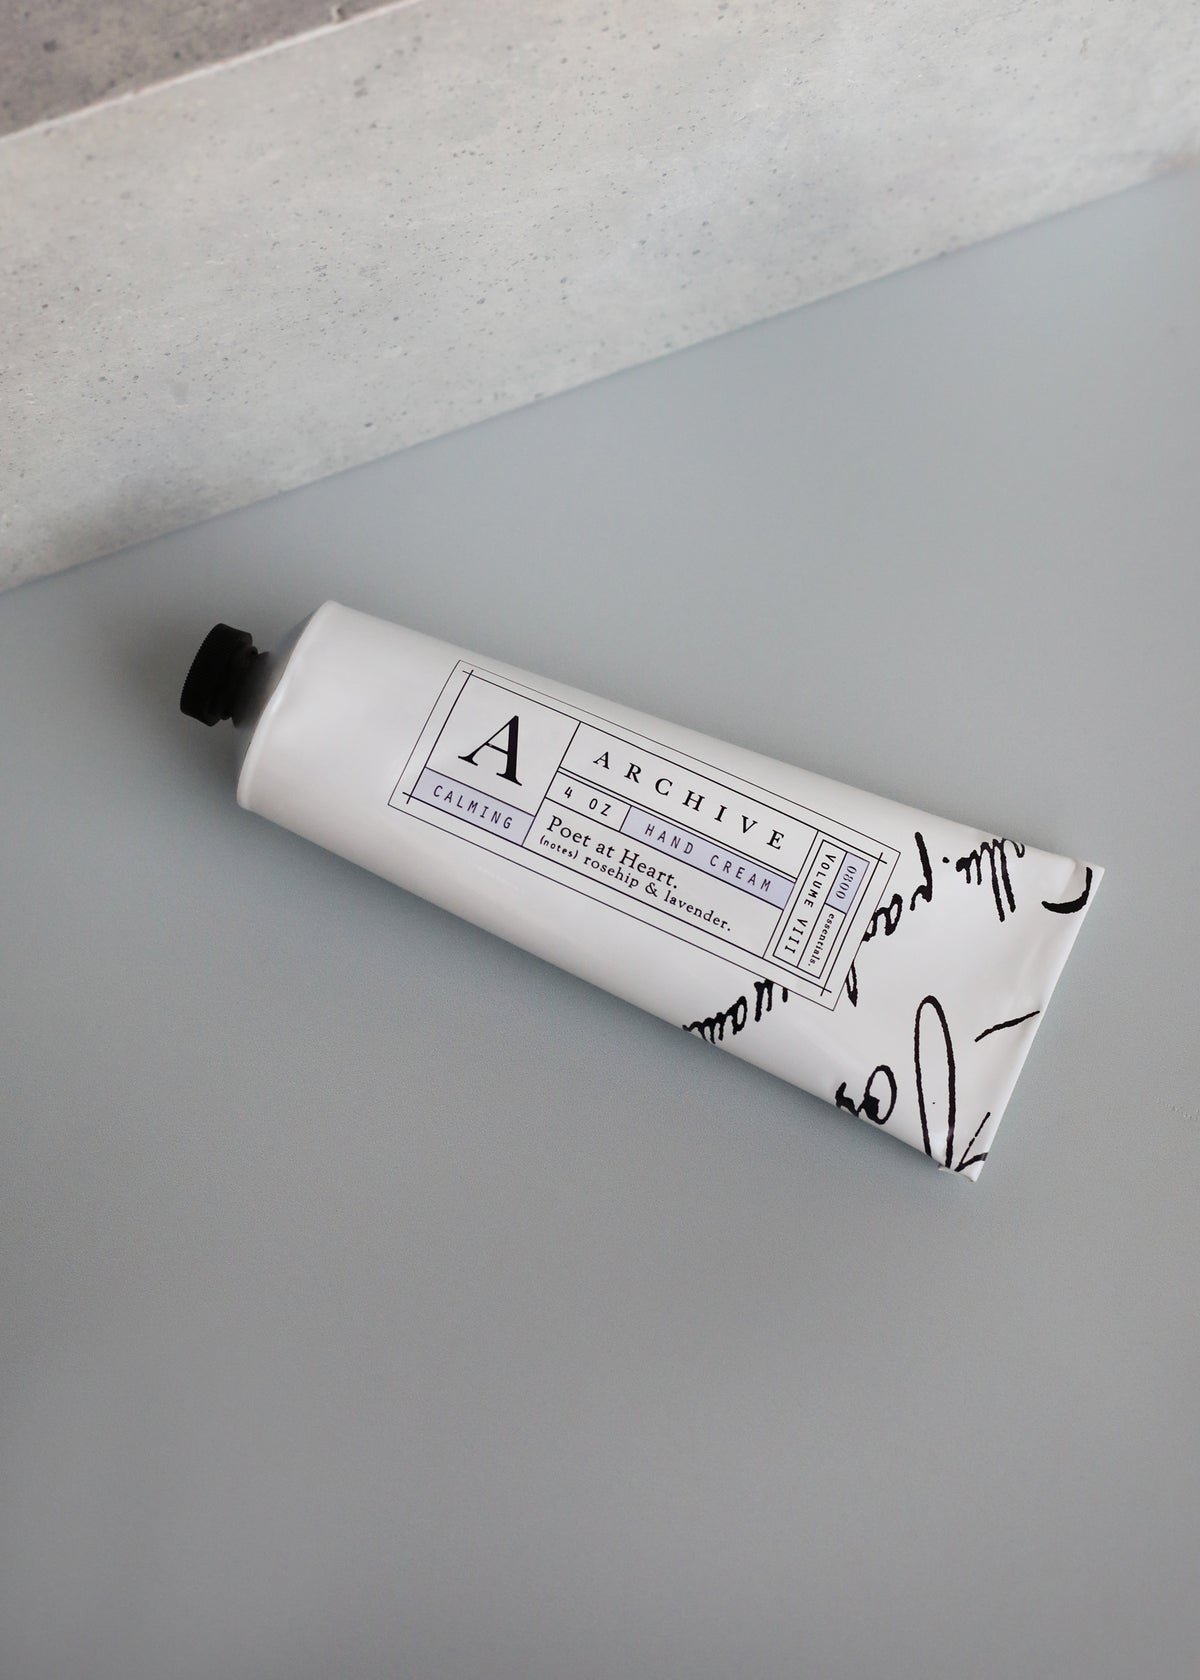 A tube of ARCHIVE by Margot Elena - Poet at Heart Hand Cream with a sleek, artistic design, labeled "archive," featuring nourishing hand cream and resting on a light gray surface with a subtle concrete texture.